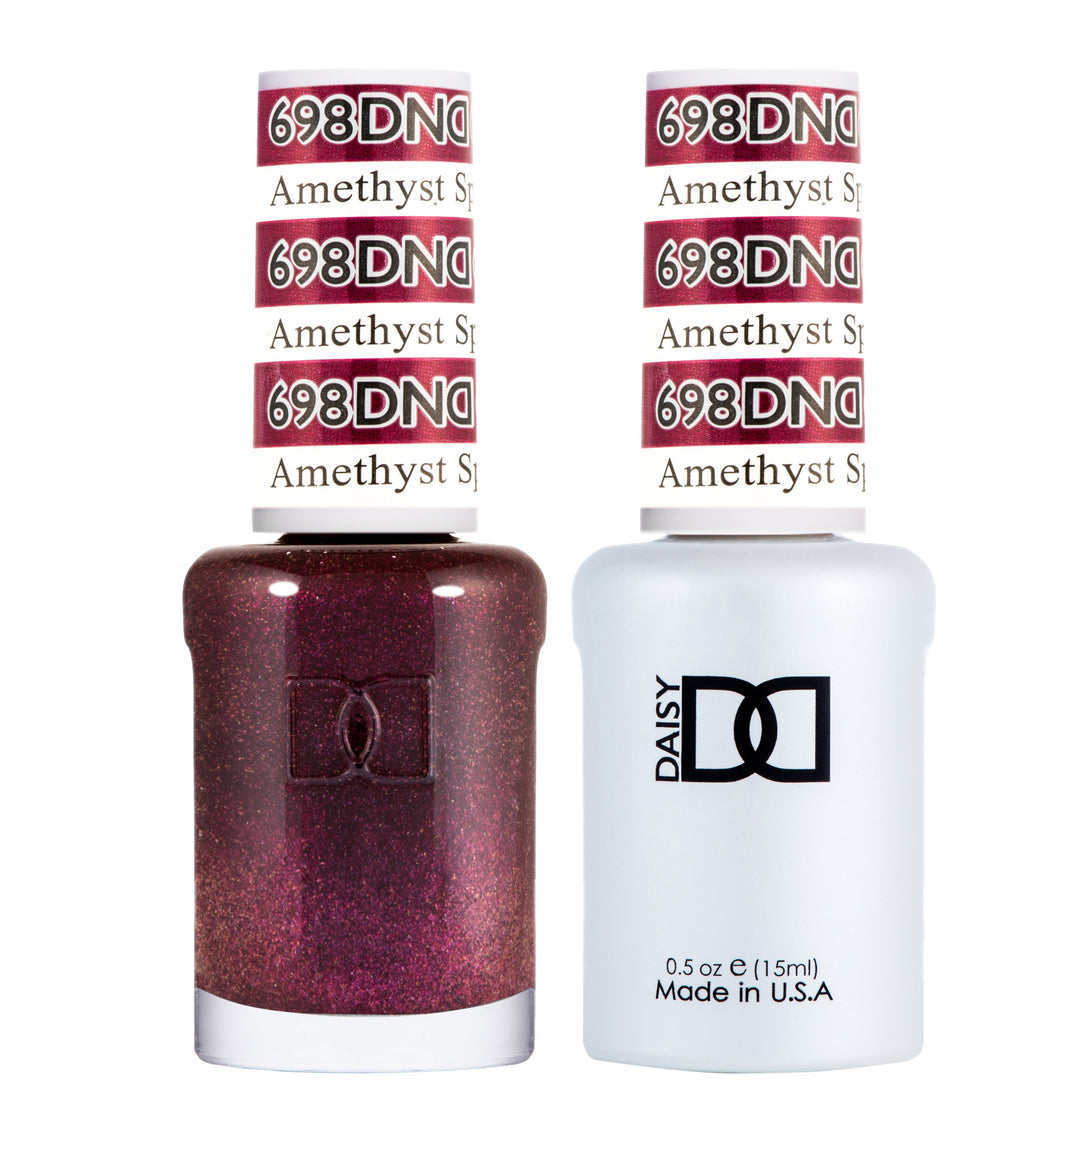 DND DUO Nail Lacquer and UV|LED Gel Polish Amethyst Sparkles 698 (2 x 15ml)